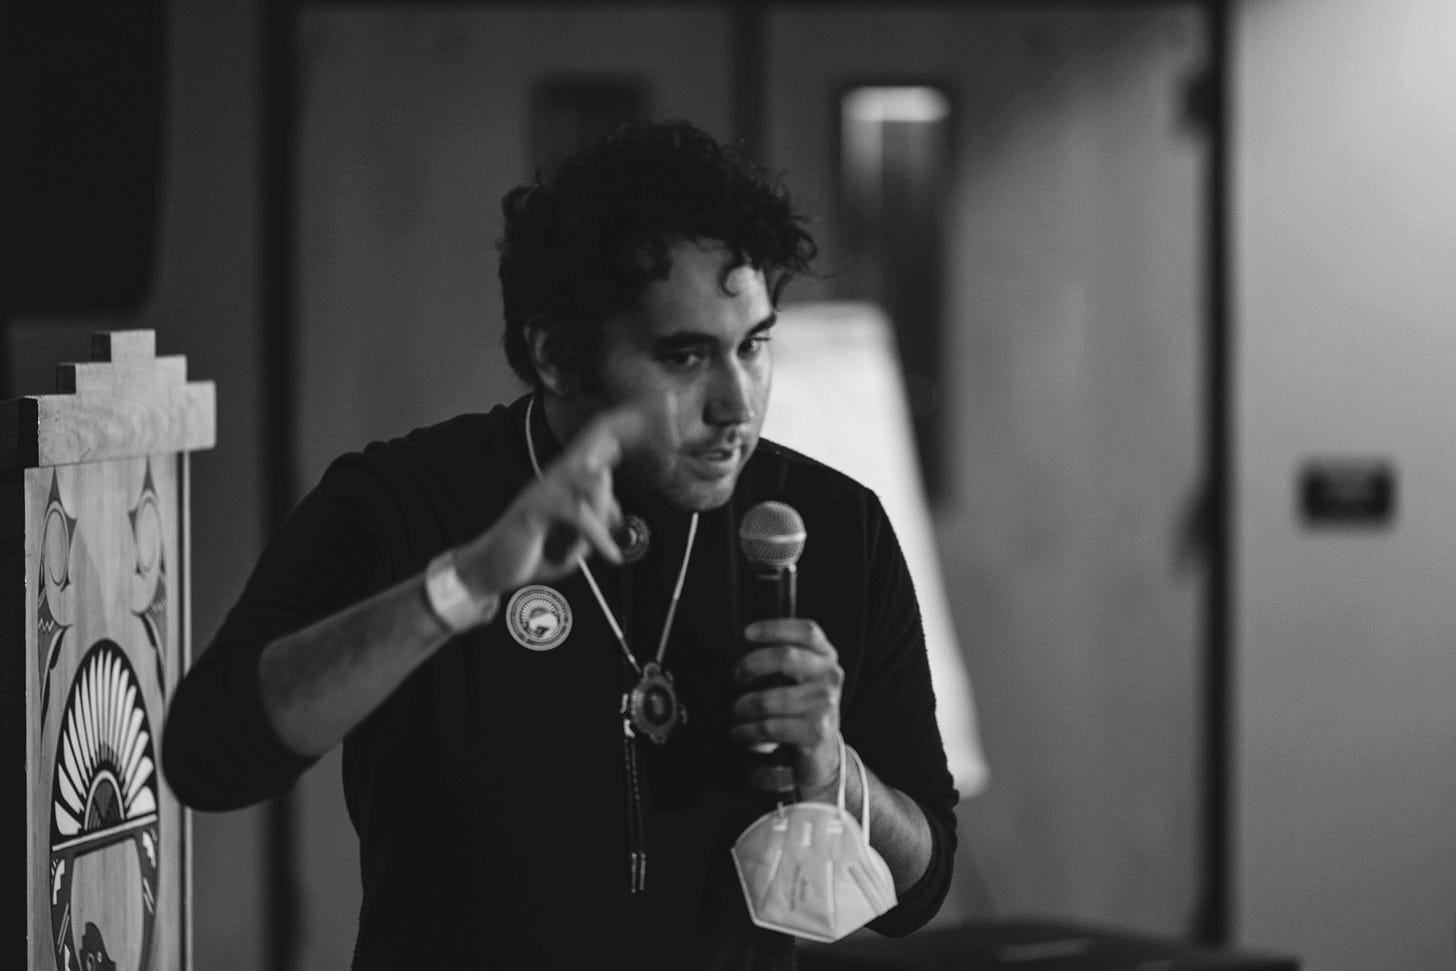 black and white photo of person speaking into microphone indoors